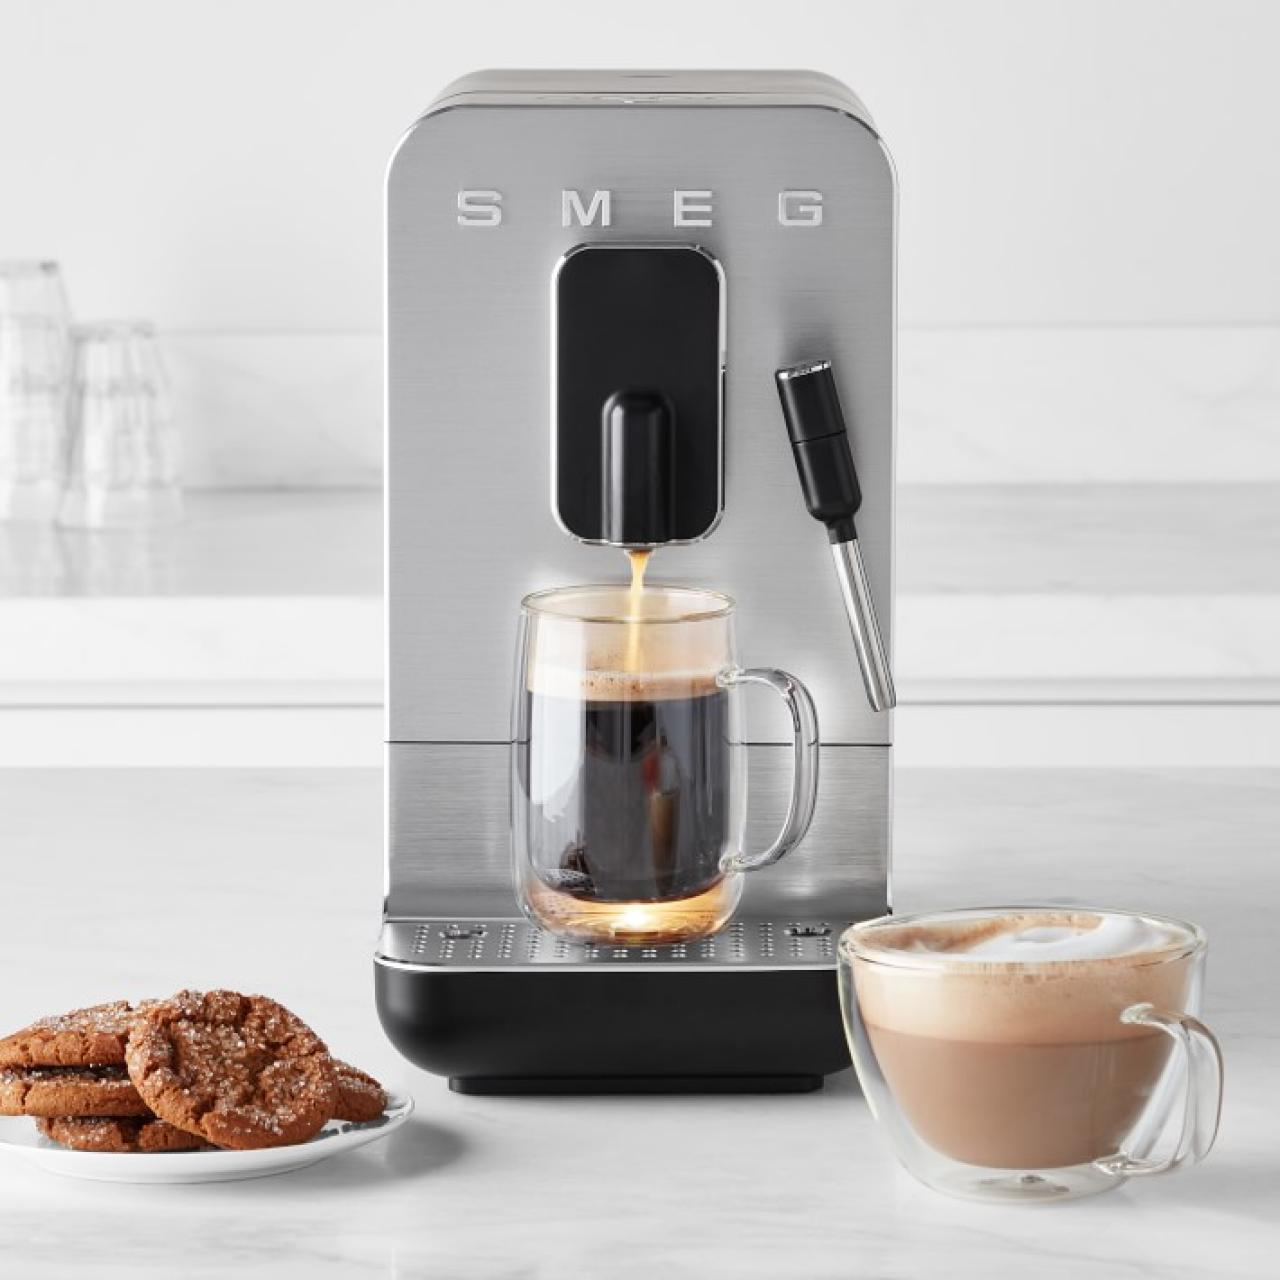 Smeg Launched New Coffee Maker and Mini Kettle